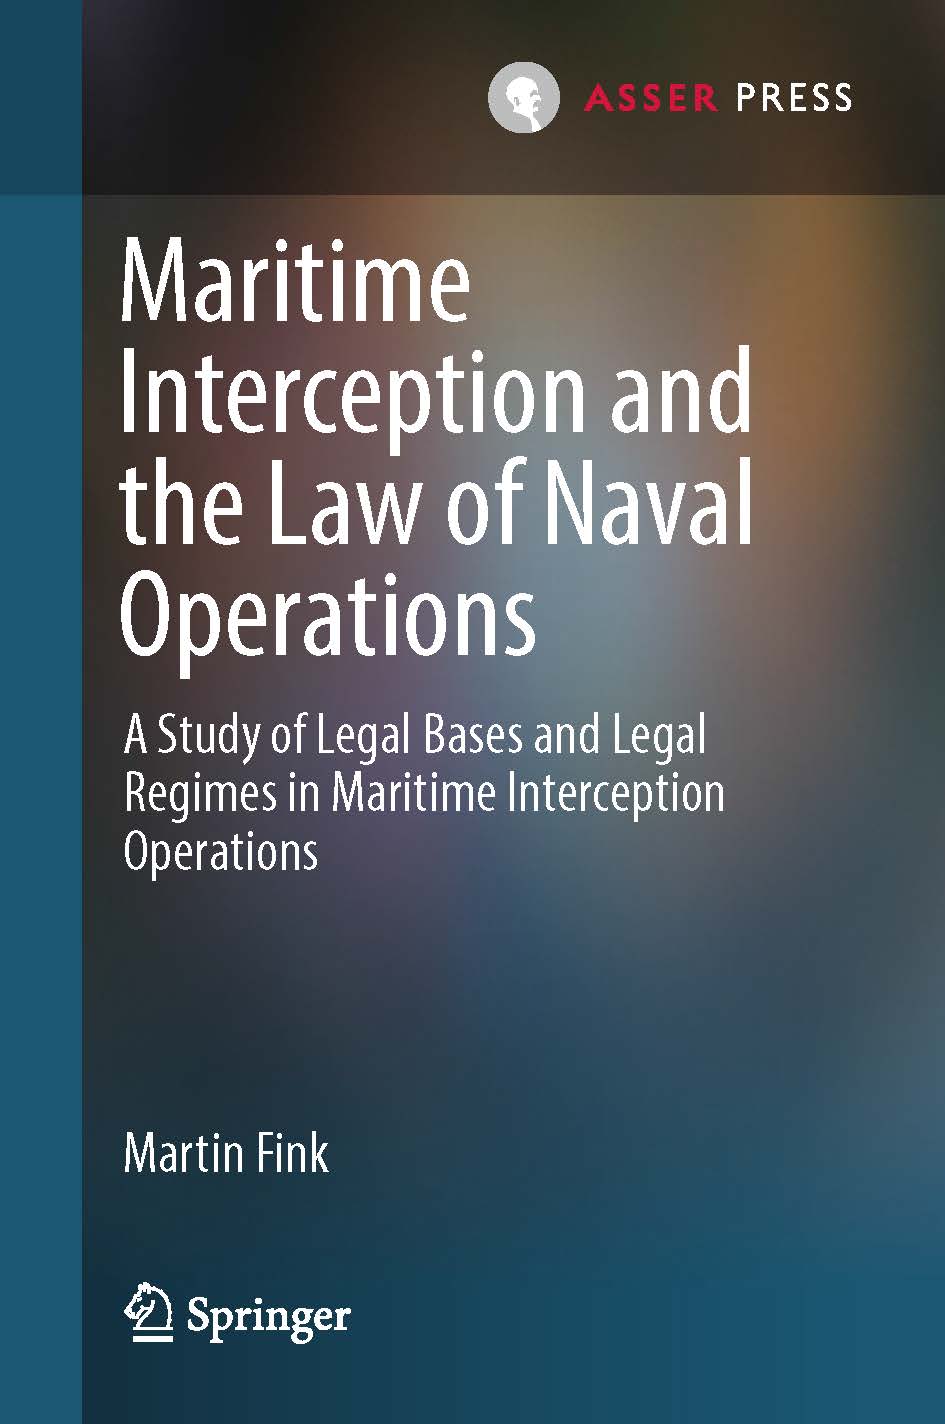 Maritime Interception and the Law of Naval Operations - A Study of Legal Bases and Legal Regimes in Maritime Interception Operations